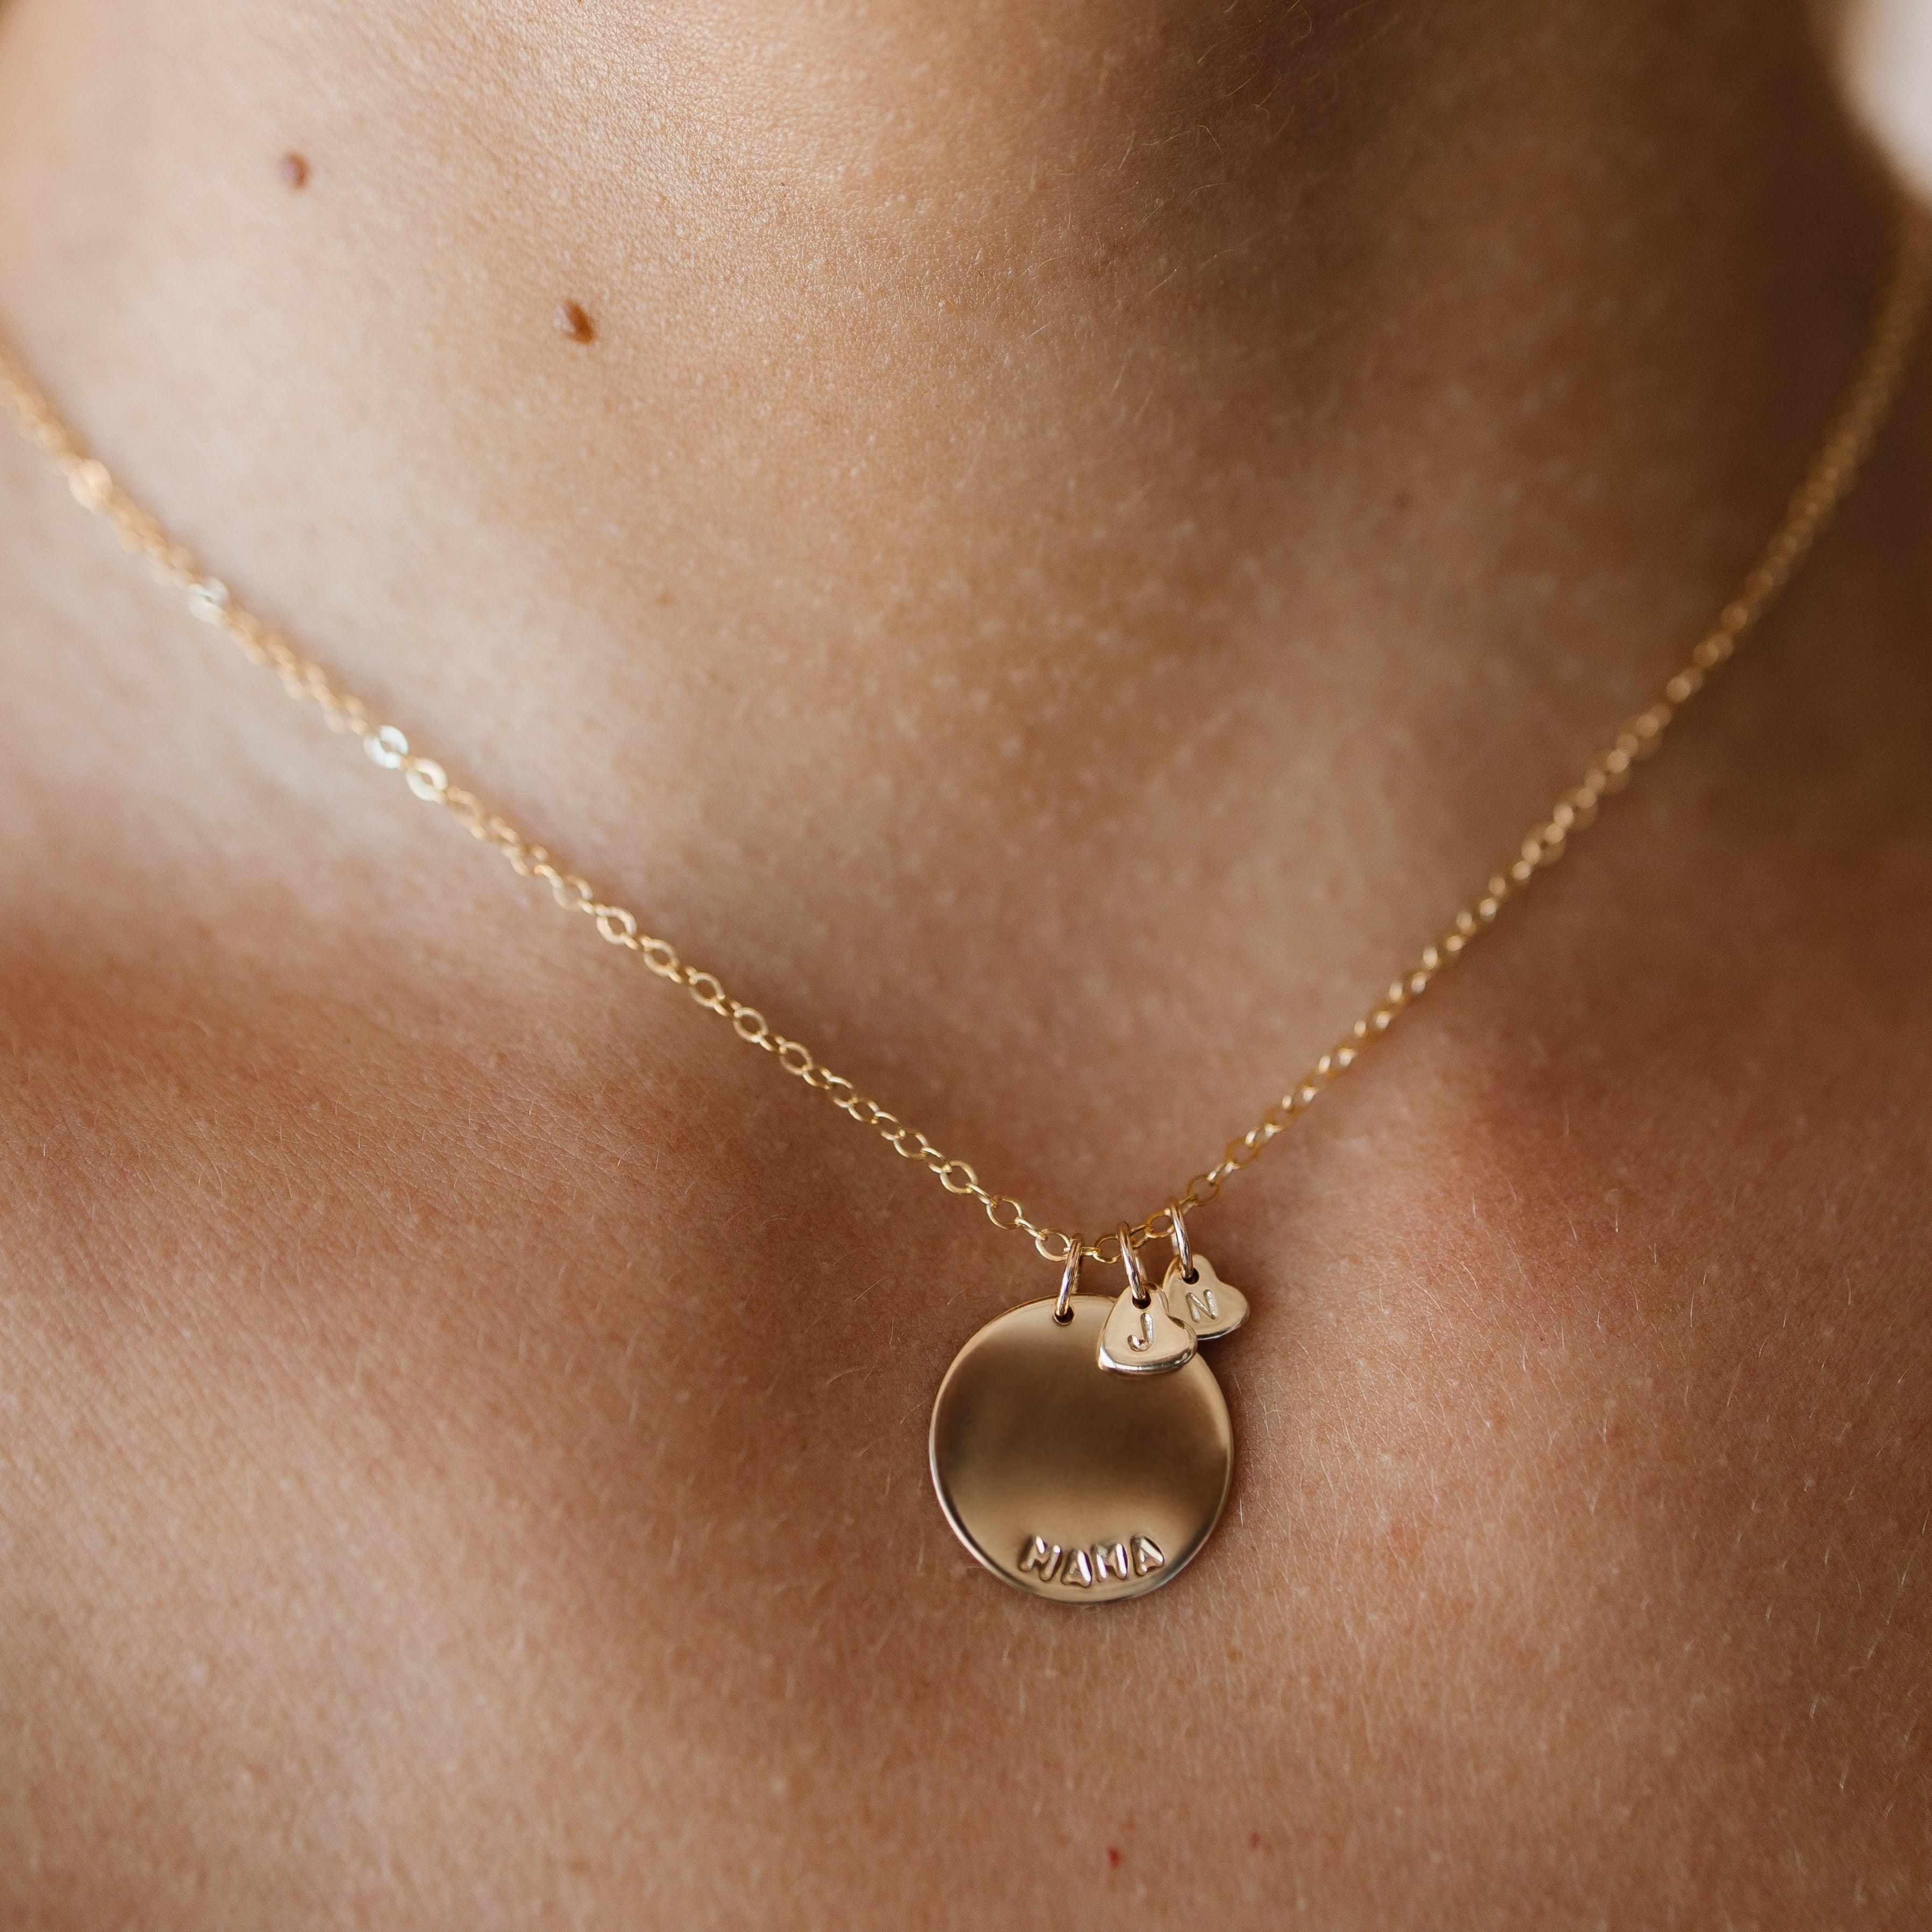 Emilia Personalized Charm Necklace - Nolia Jewelry - Meaningful + Sustainably Handcrafted Jewelry